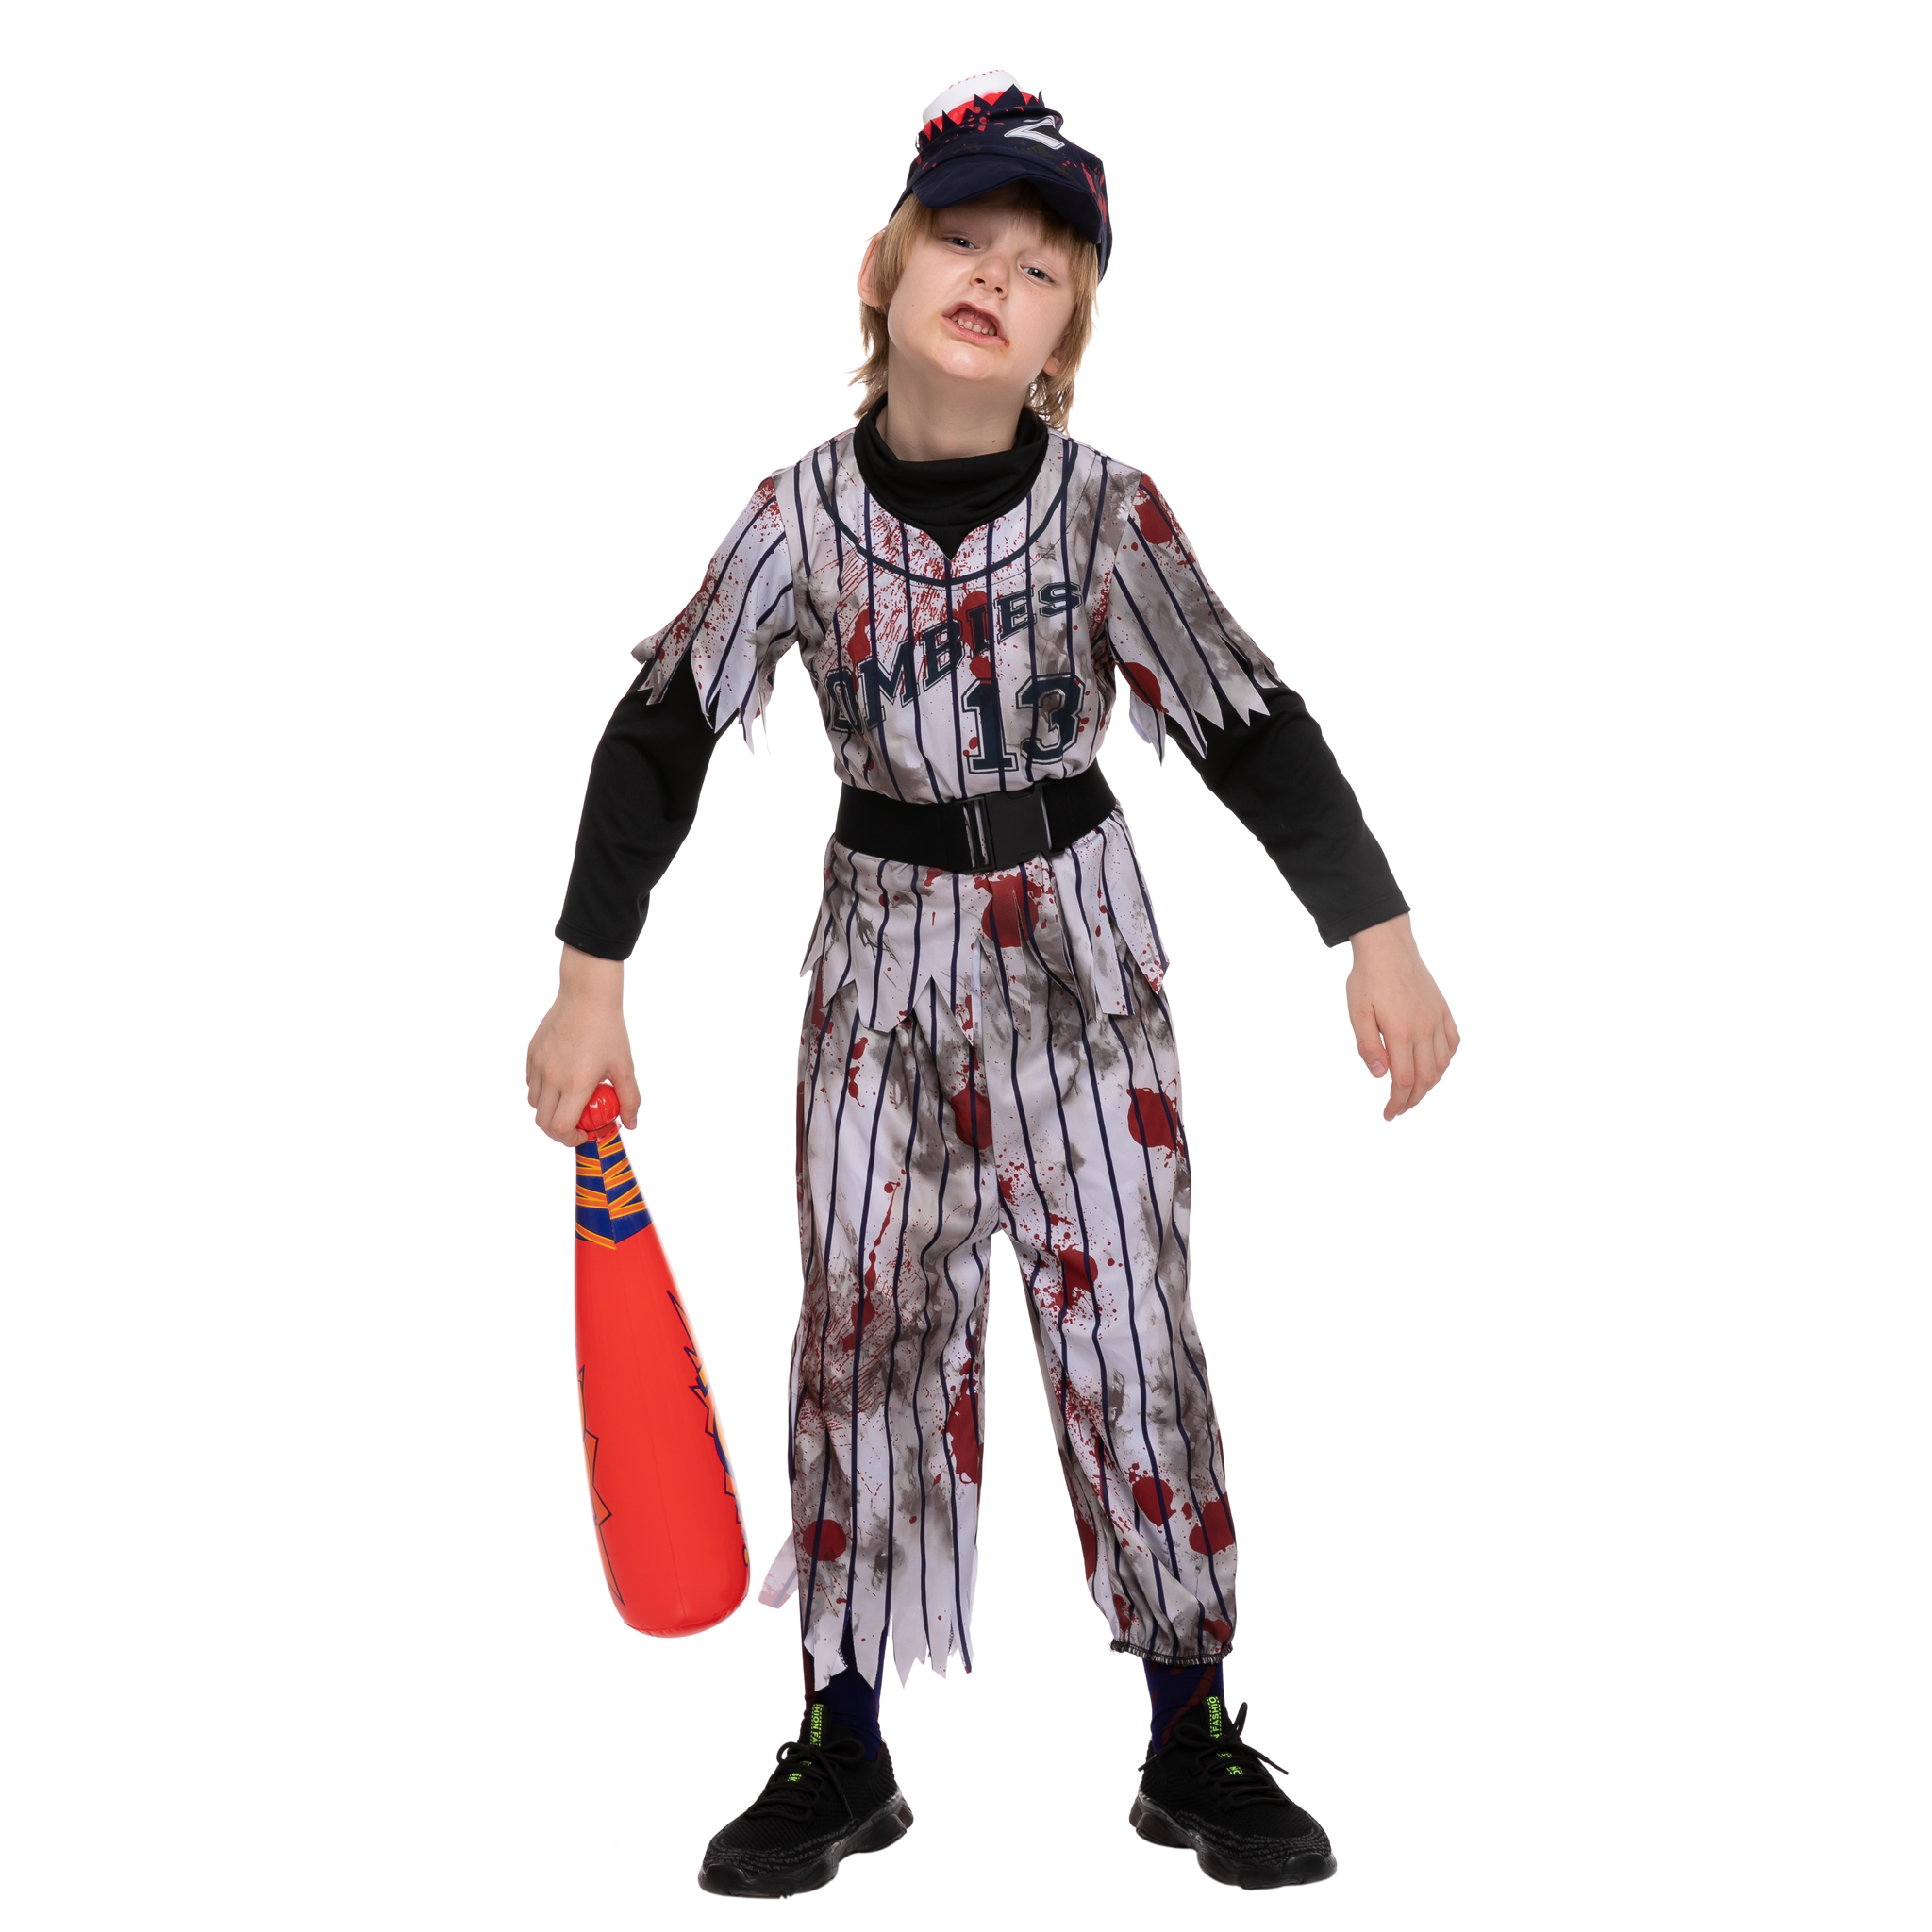 Scary Baseball Player Zombie Costume - SPOOKTACULAR